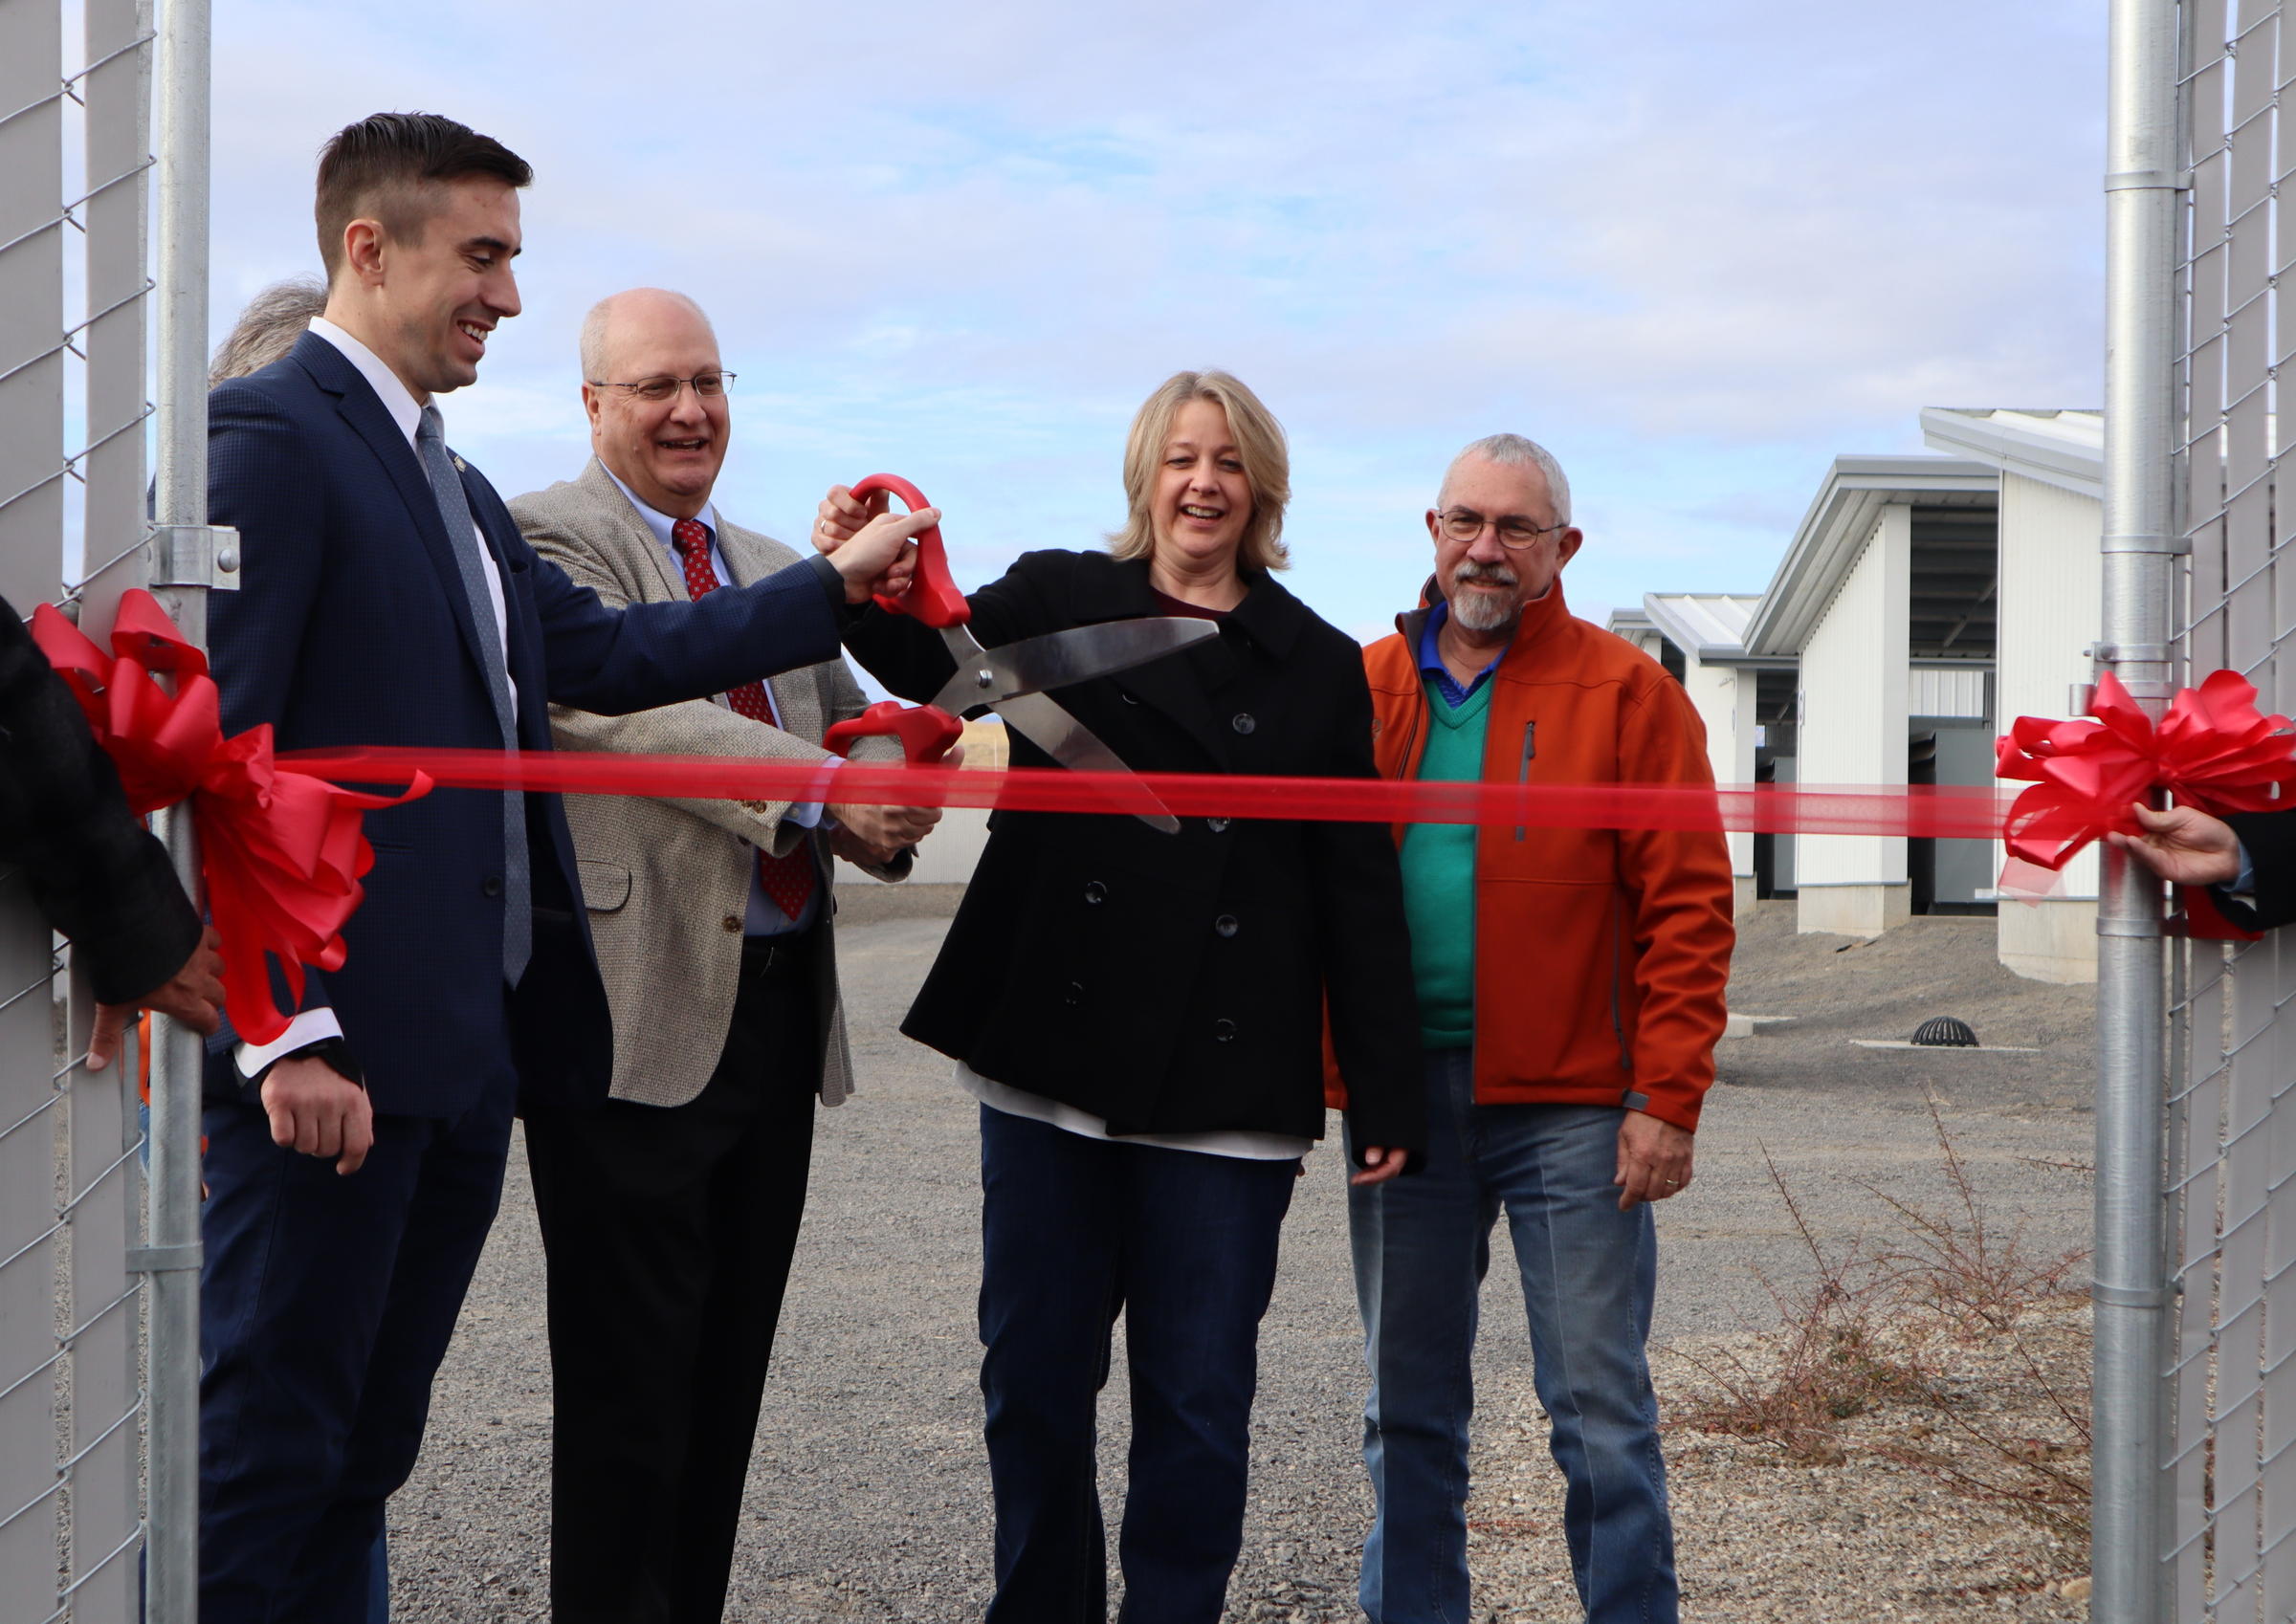 Dignitaries cut the ribbon at the grand opening of Bitmain's new East Wenatchee bitcoin mine -- in other words, a data center that earns cryptocurrency. CREDIT: TOM BANSE